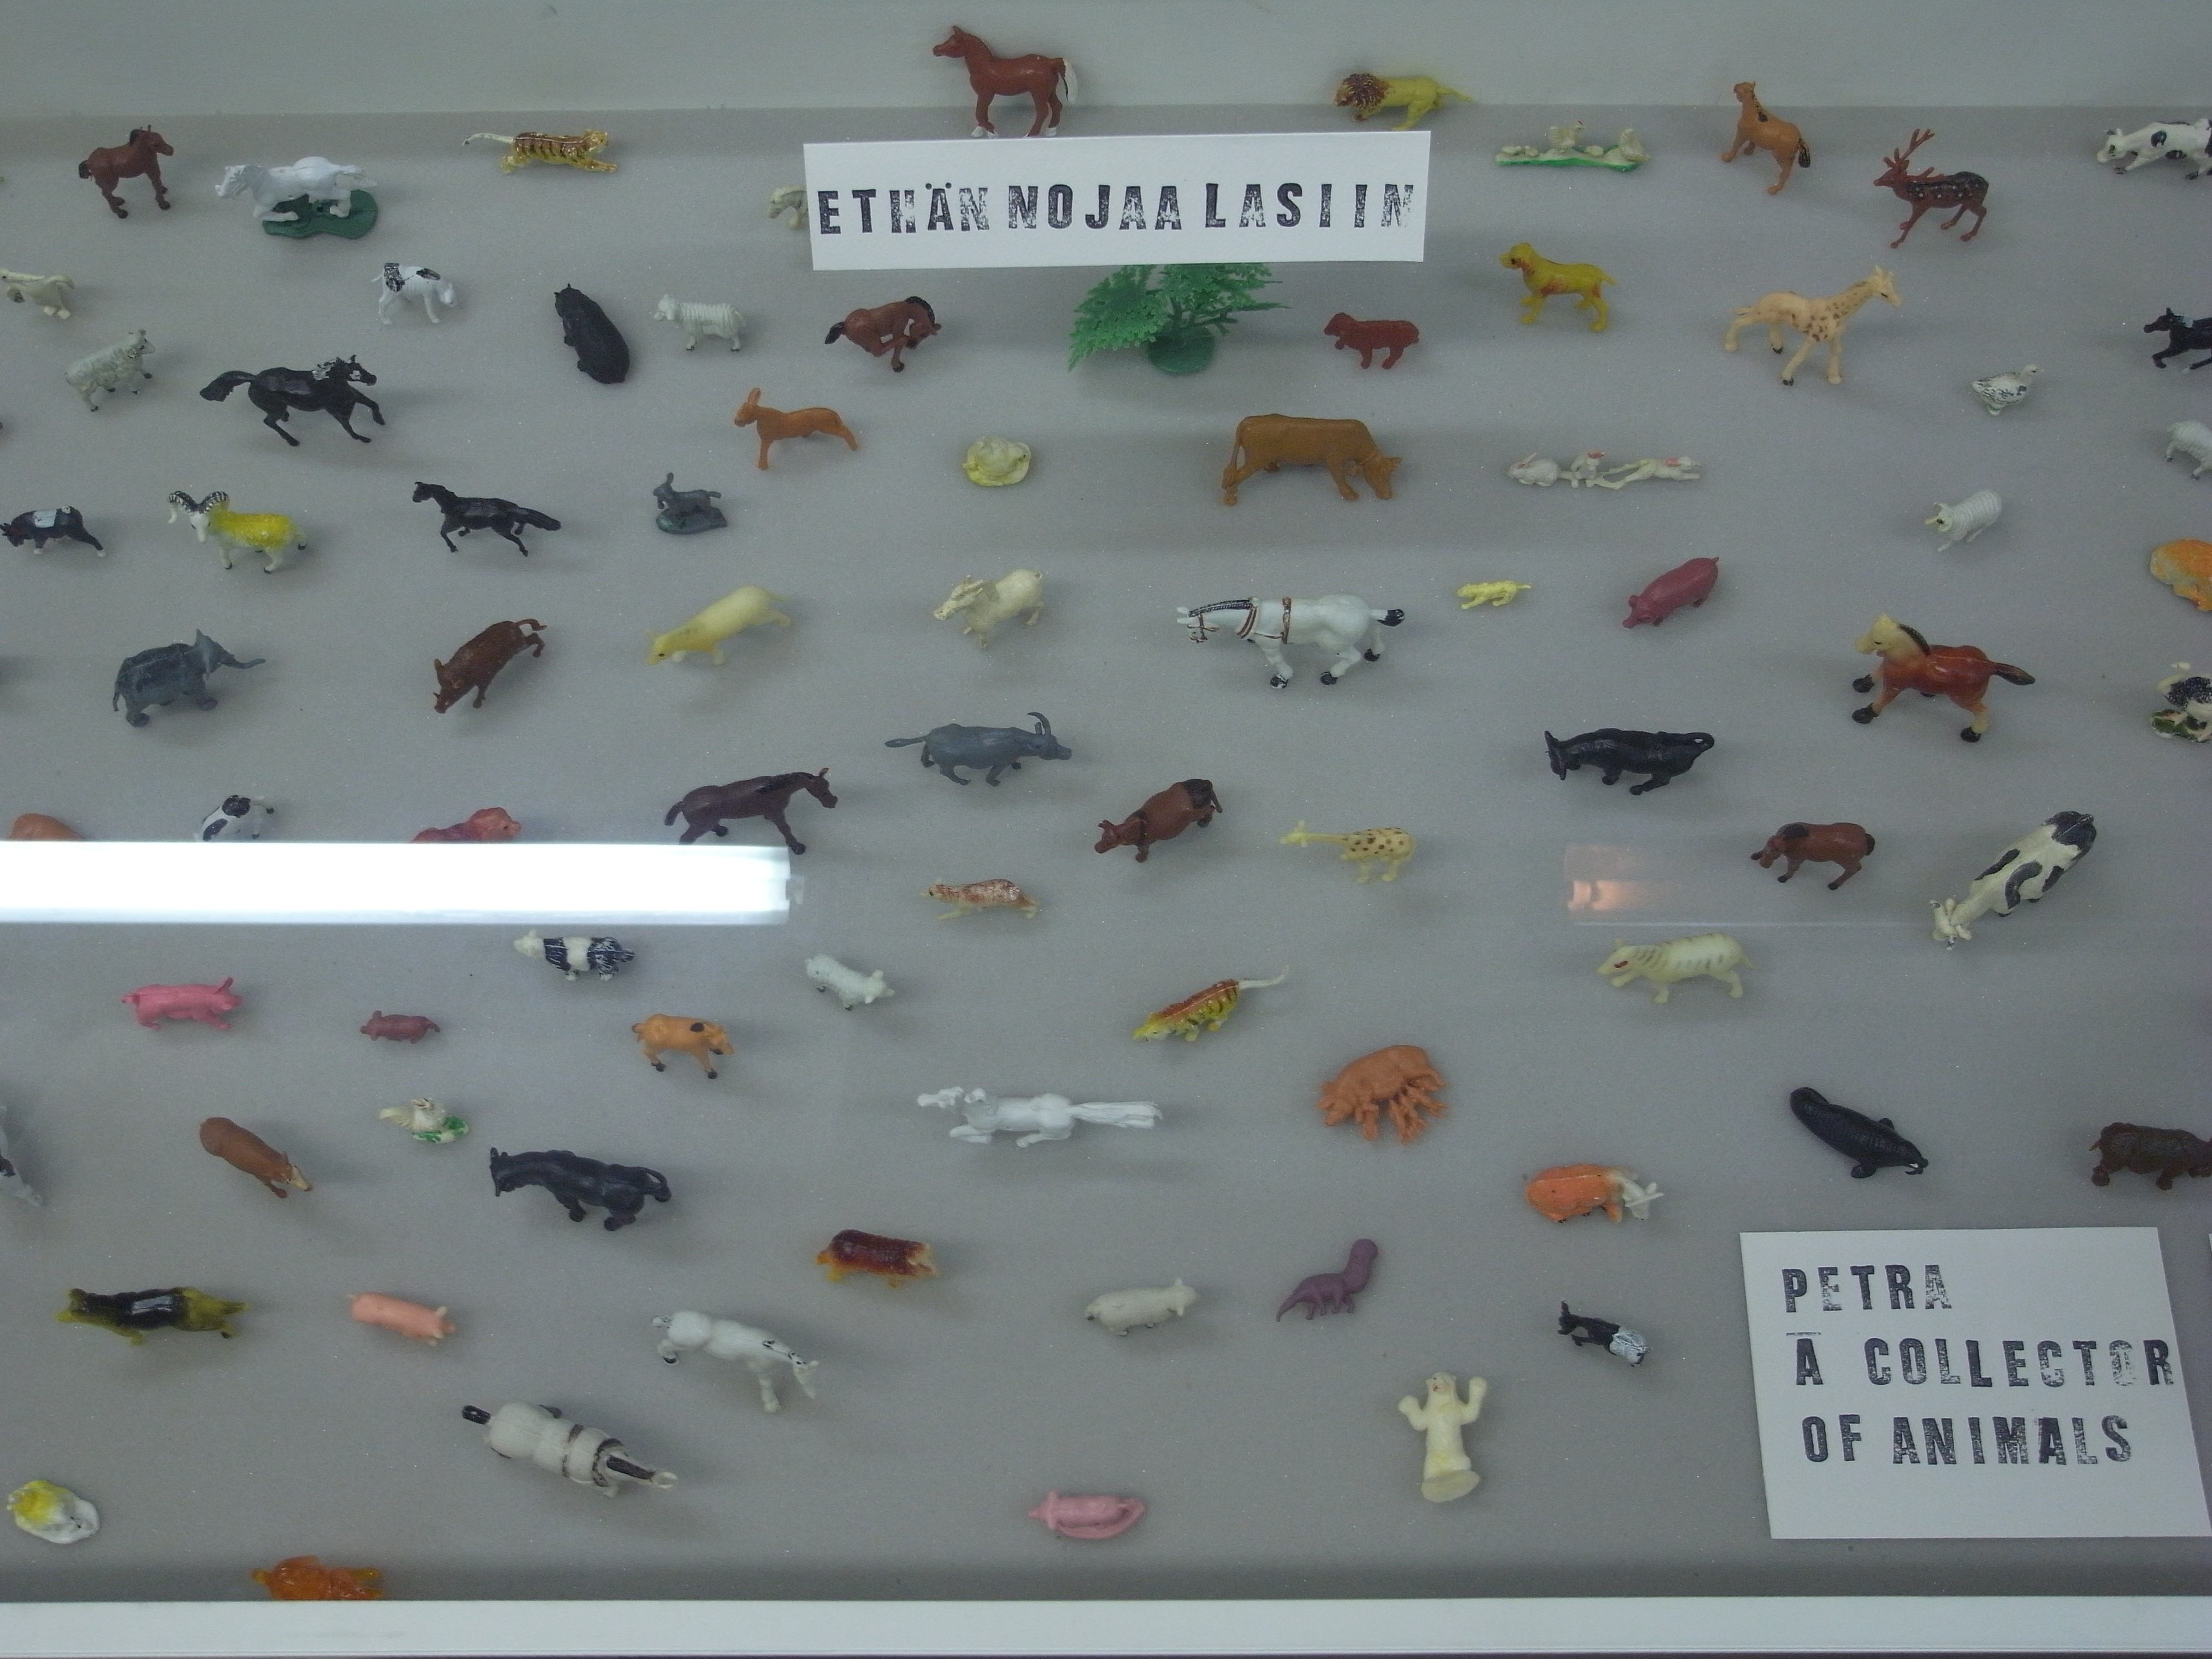 Exhibition #2, Petra's collection of plastic animals